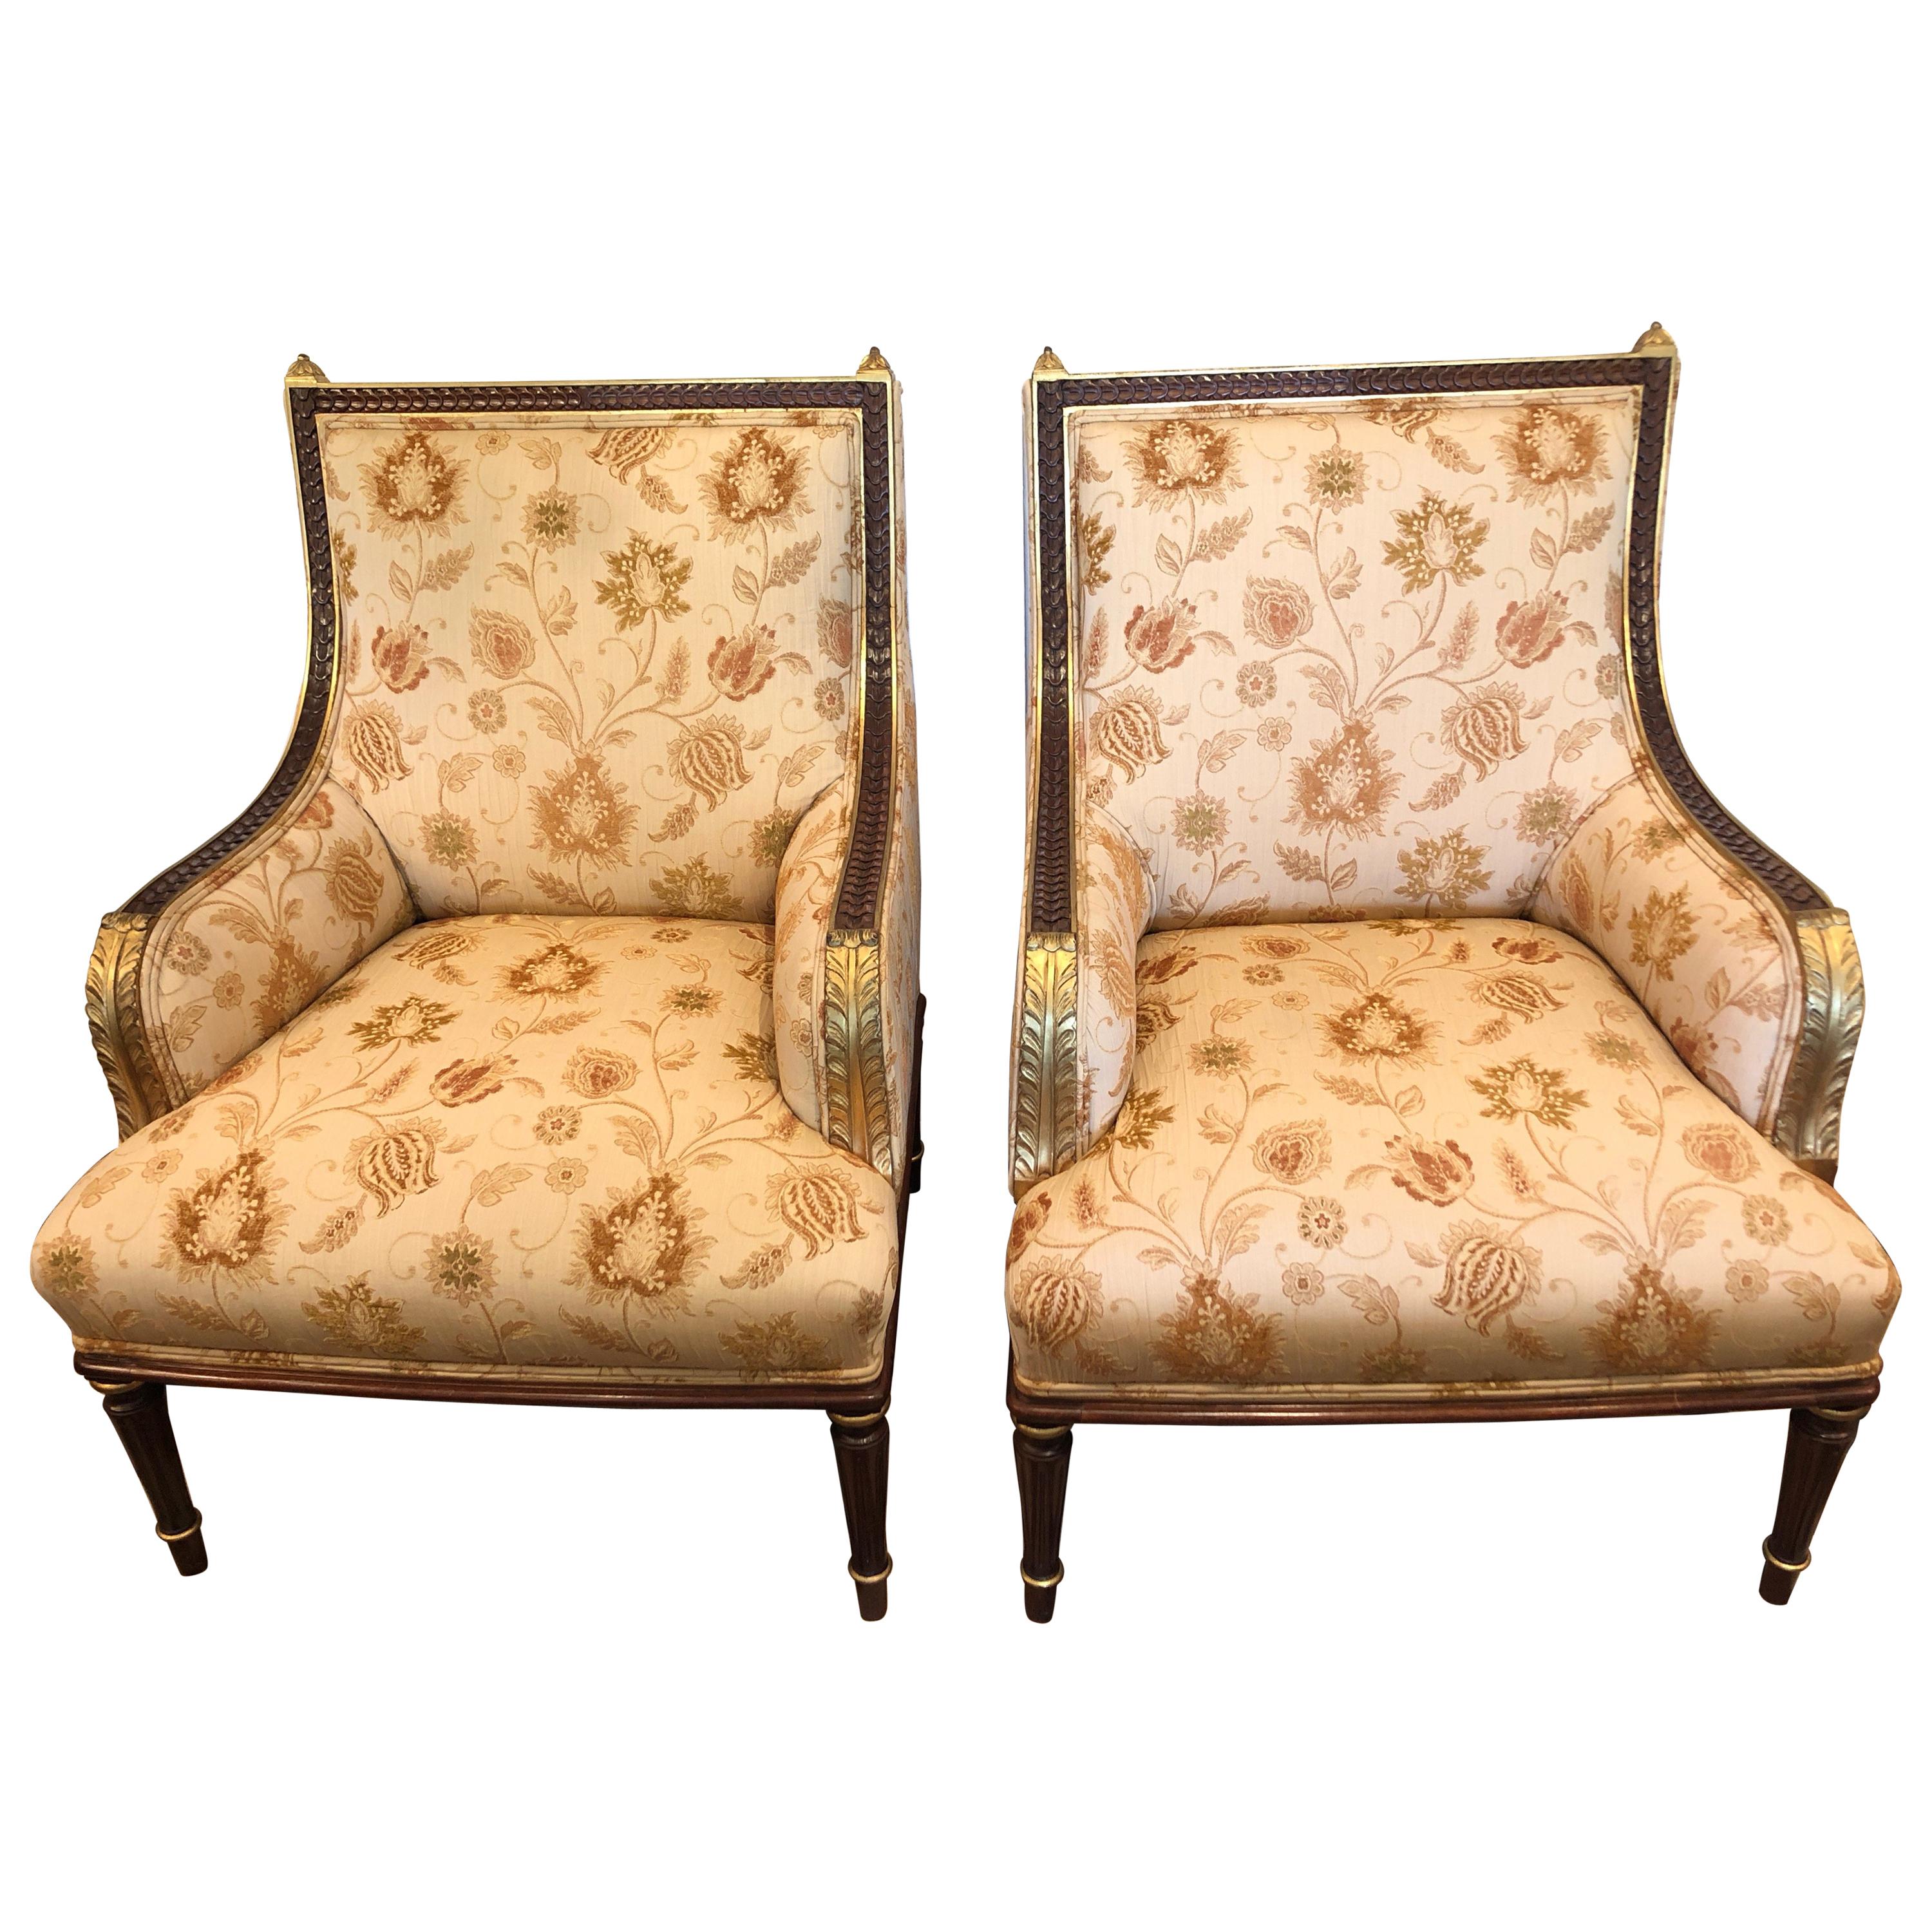 Lovely Pair of Carved Gilded Wood and Upholstered French Bergère